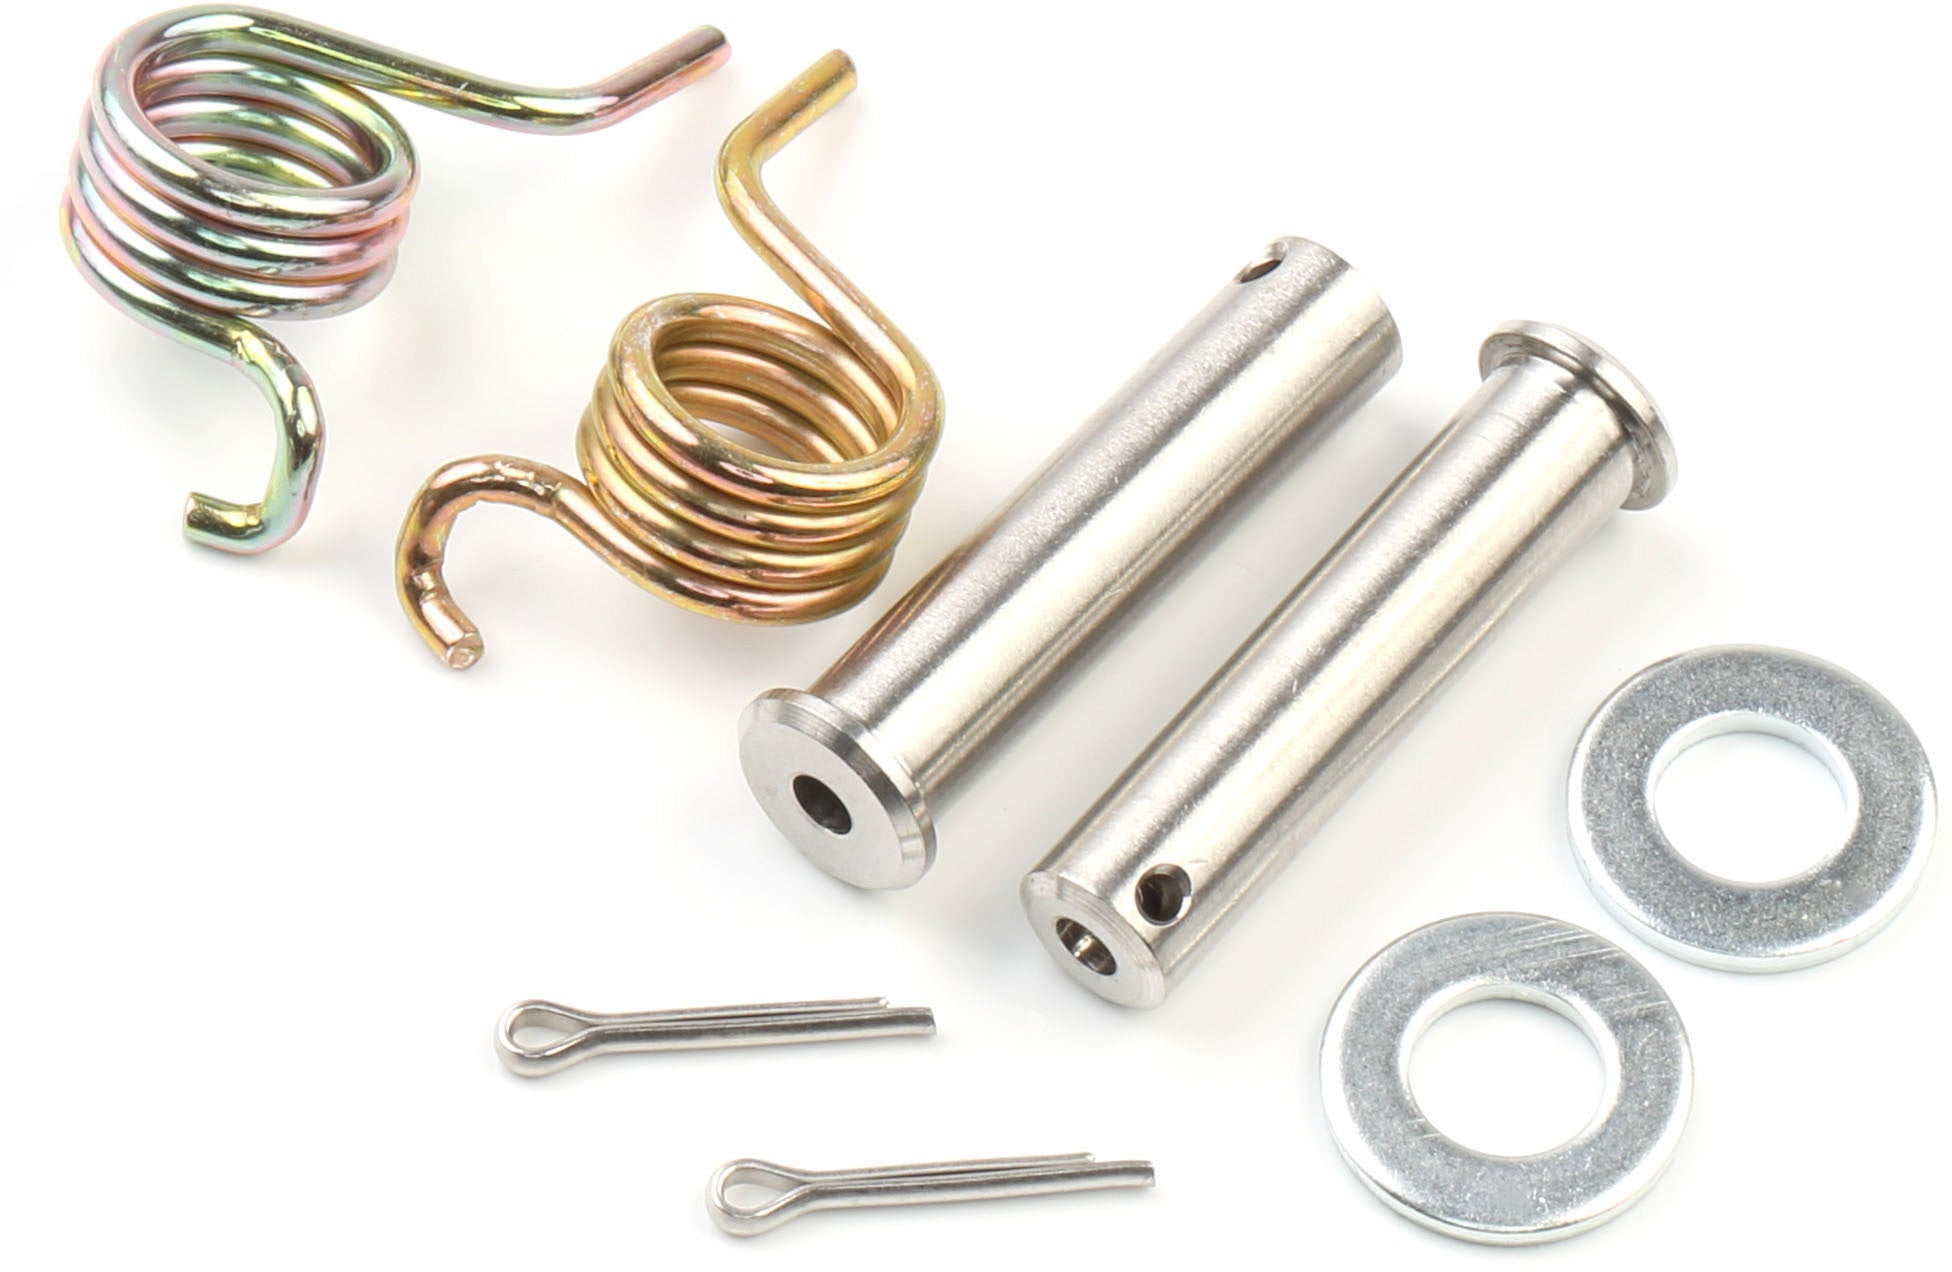 Foot peg spring pin set for KXF250/450 models from 2009 to 2021